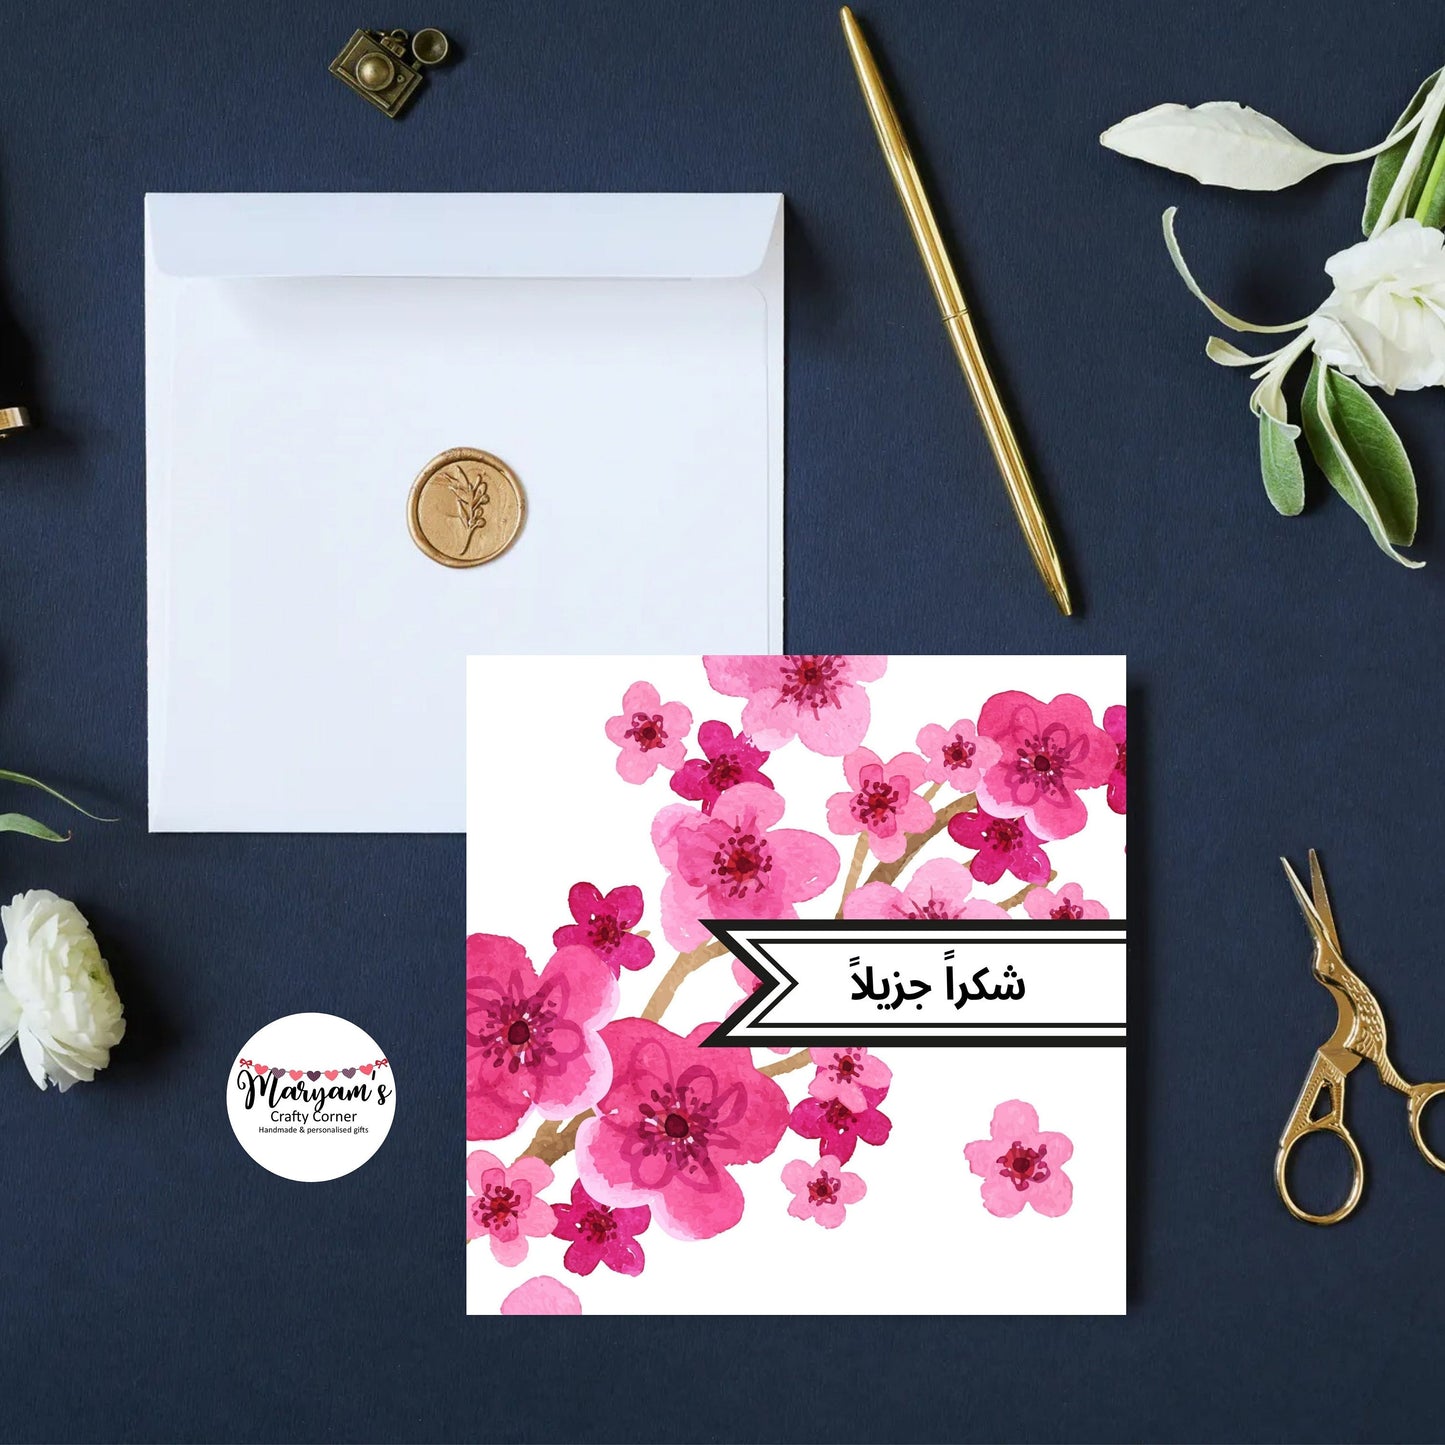 Shukran, Islamic Greeting card saying Thank you pink floral cherry blossom